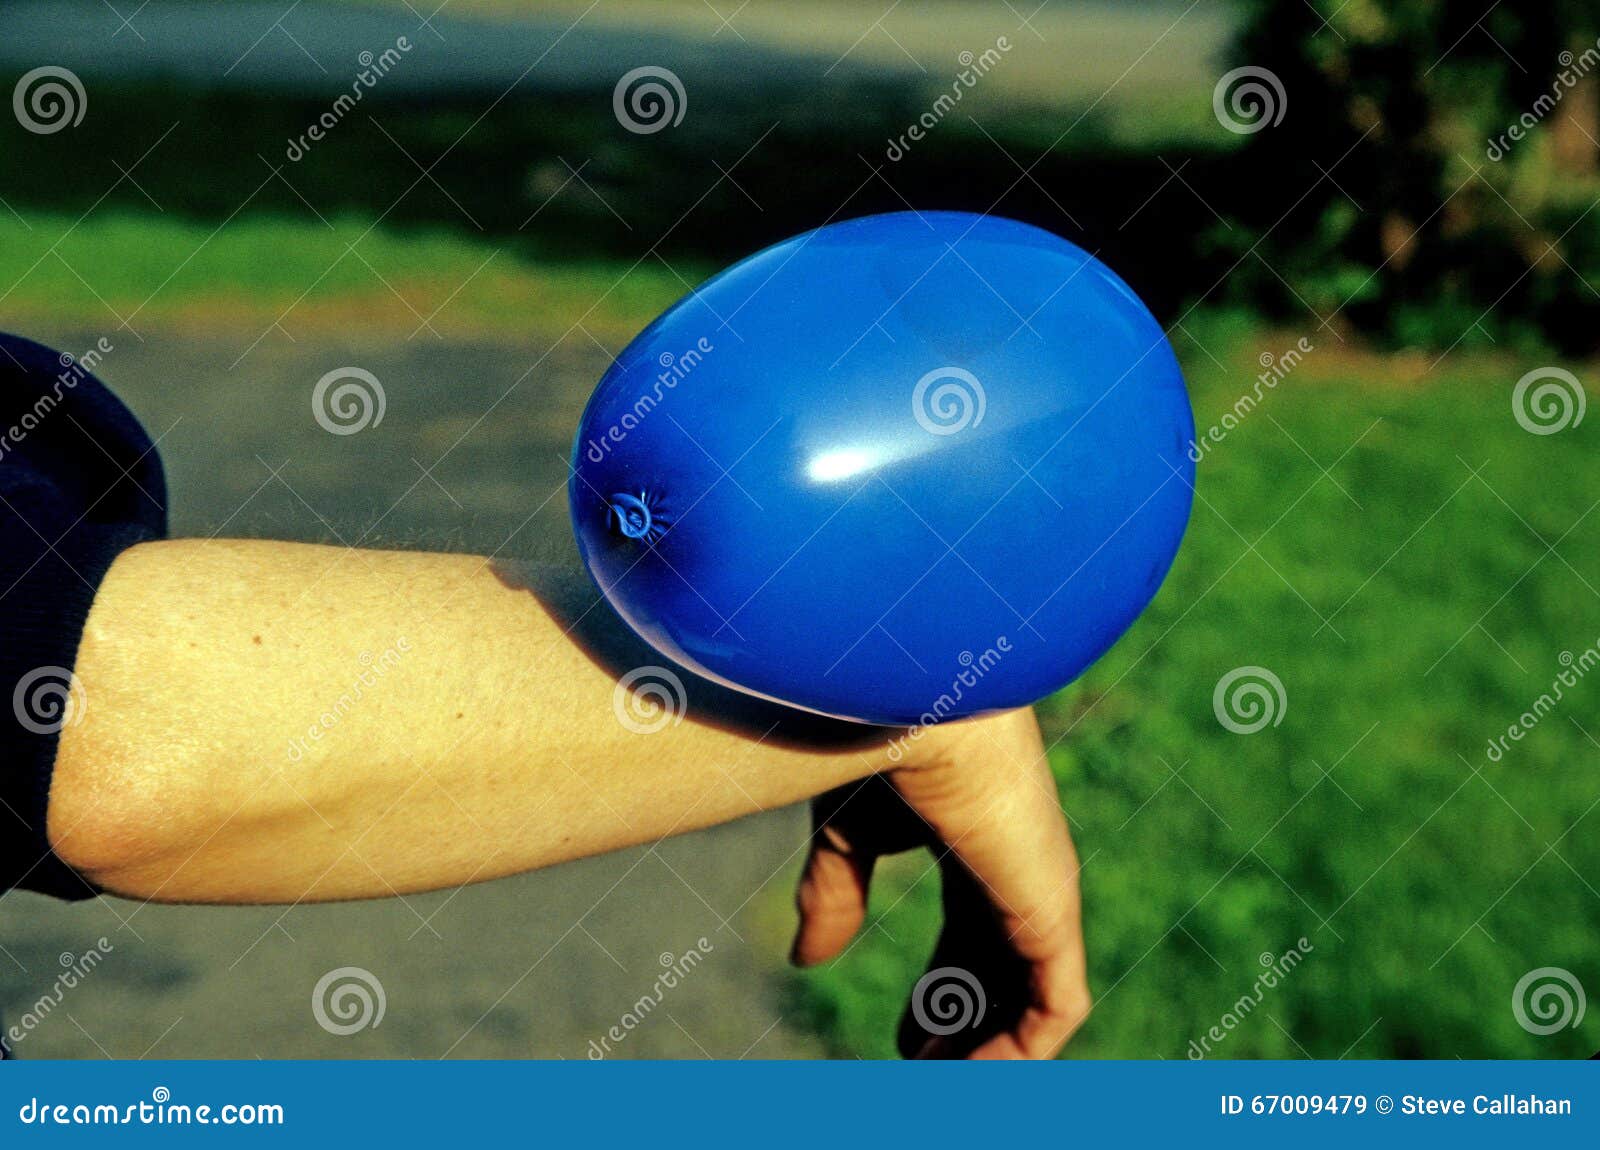 static electricity shown by balloon attached to female arm